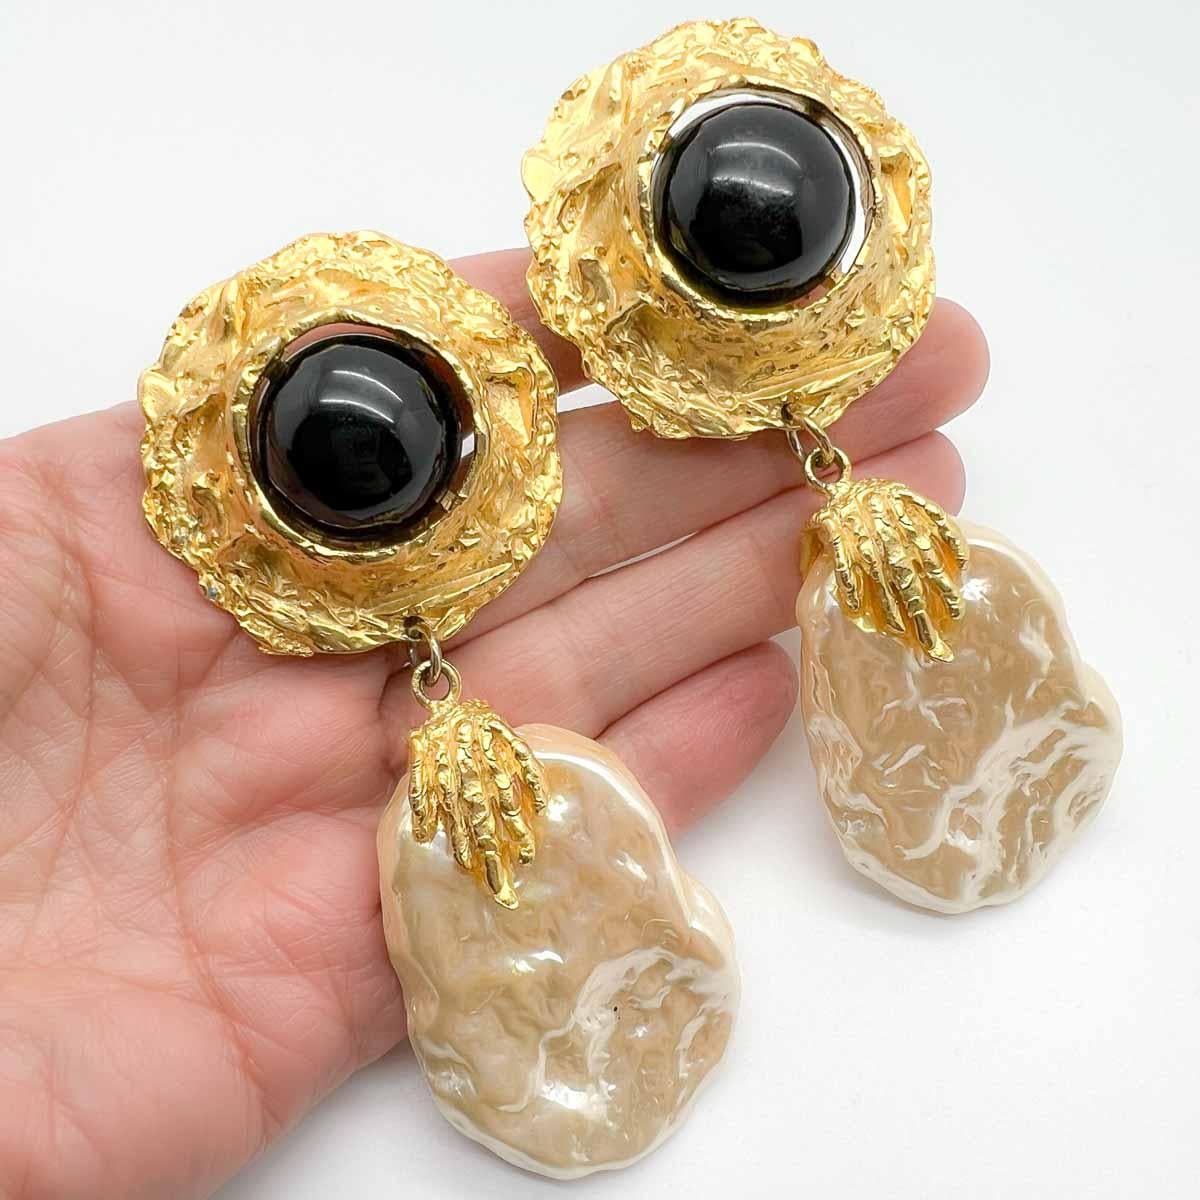 Vintage Craft Statement Earrings. Stunning gigantic earrings comprising the chicest trio of colours. Richly gold textured metal, large black cabochon and fabulous large baroque style pearl drops. Sublime.

Vintage Condition: Very good without damage